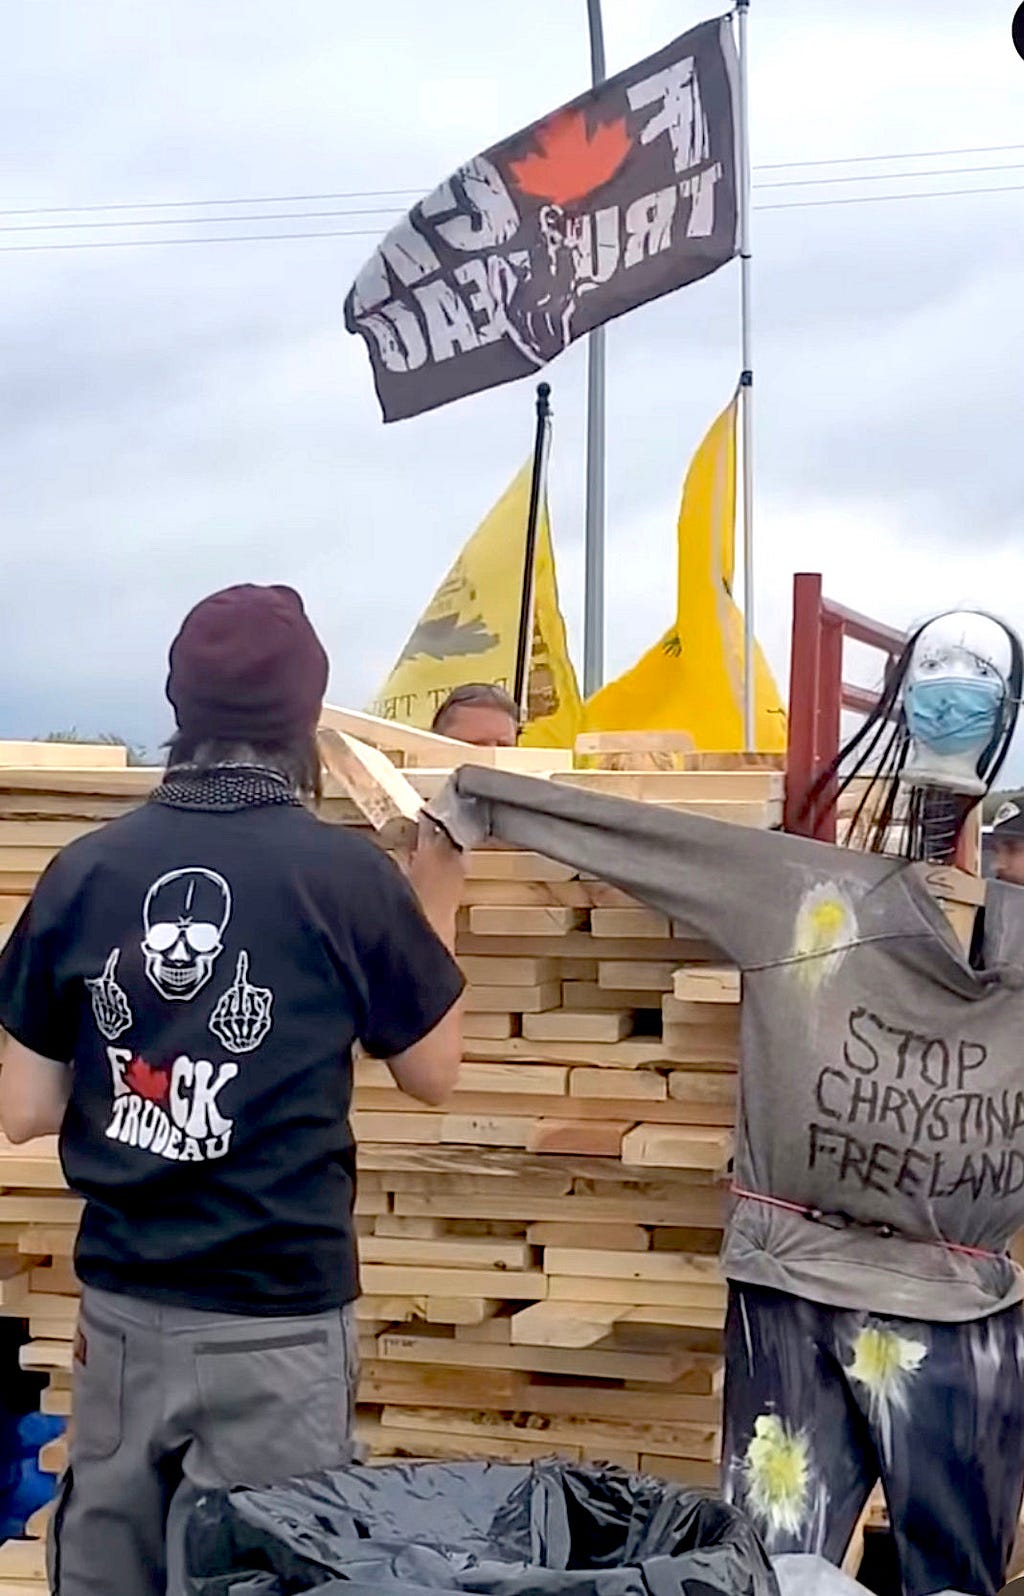 A man in a Fuck Trudeau hoodie builds a structure next to an effigy depicting Deputy Prime Minister Chrystia Freeland. A Fuck Trudeau flag flies above.